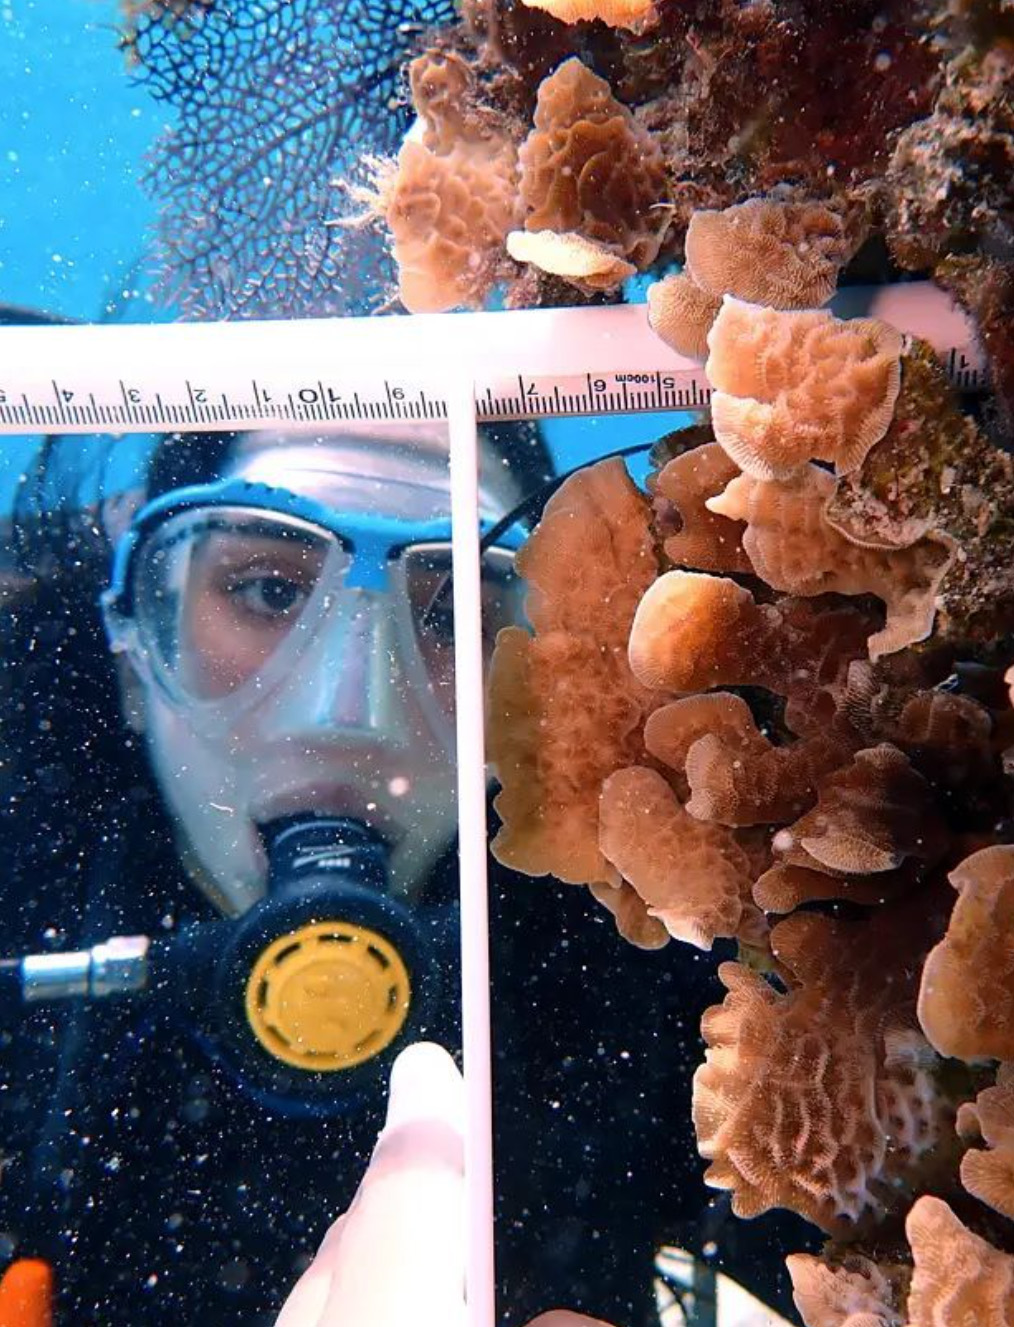 Diver measuring coral size at restoration structure in Cozumel, Mexico